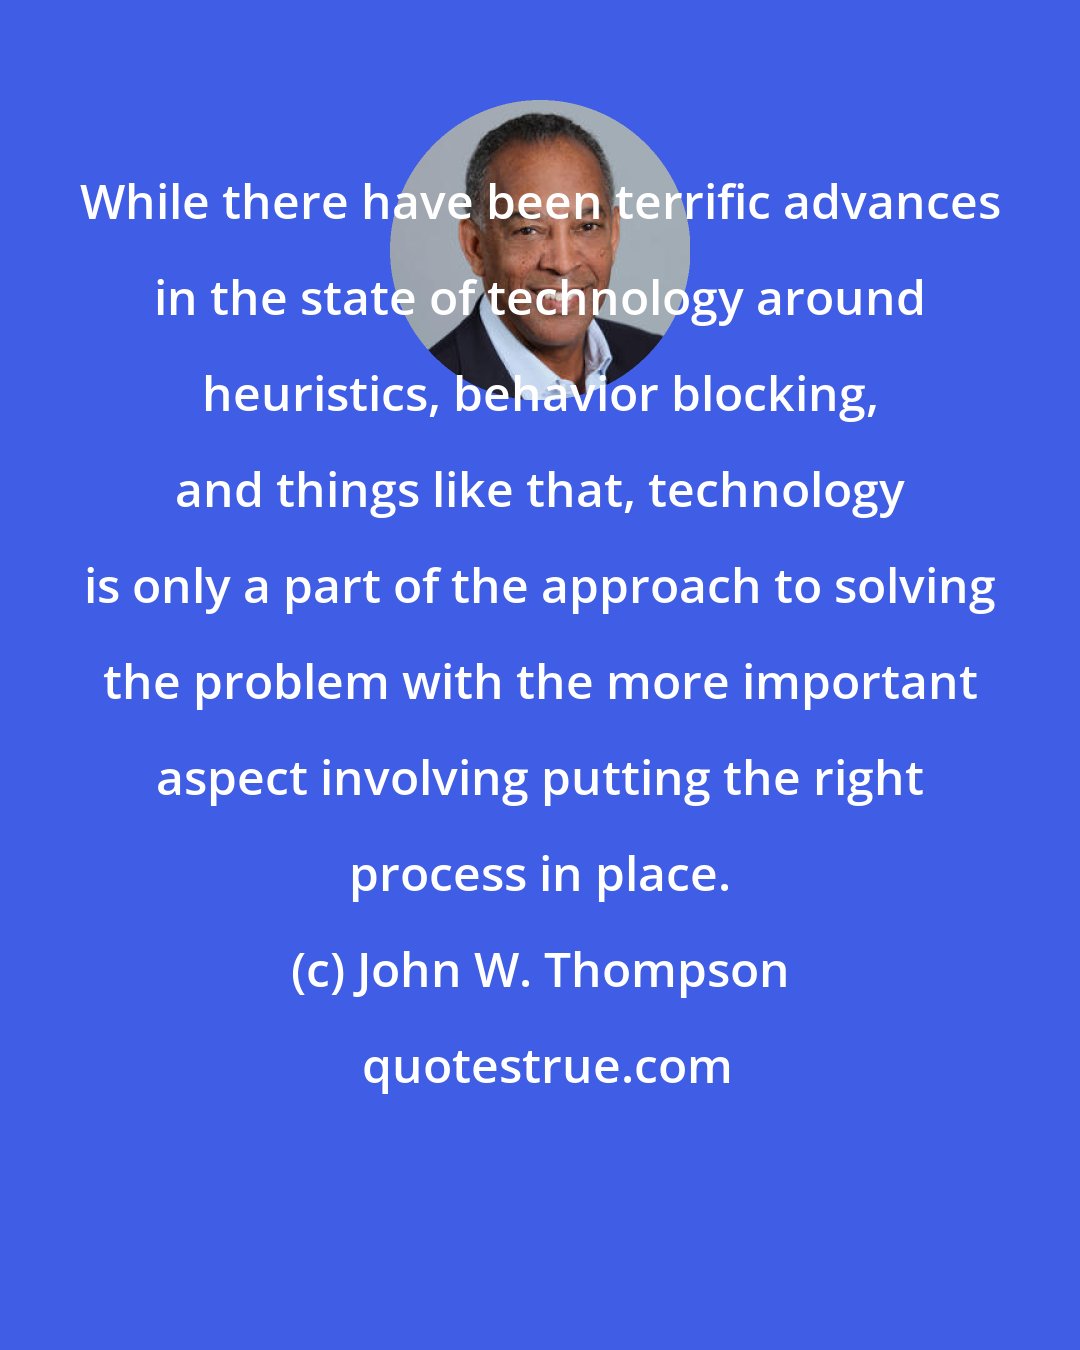 John W. Thompson: While there have been terrific advances in the state of technology around heuristics, behavior blocking, and things like that, technology is only a part of the approach to solving the problem with the more important aspect involving putting the right process in place.